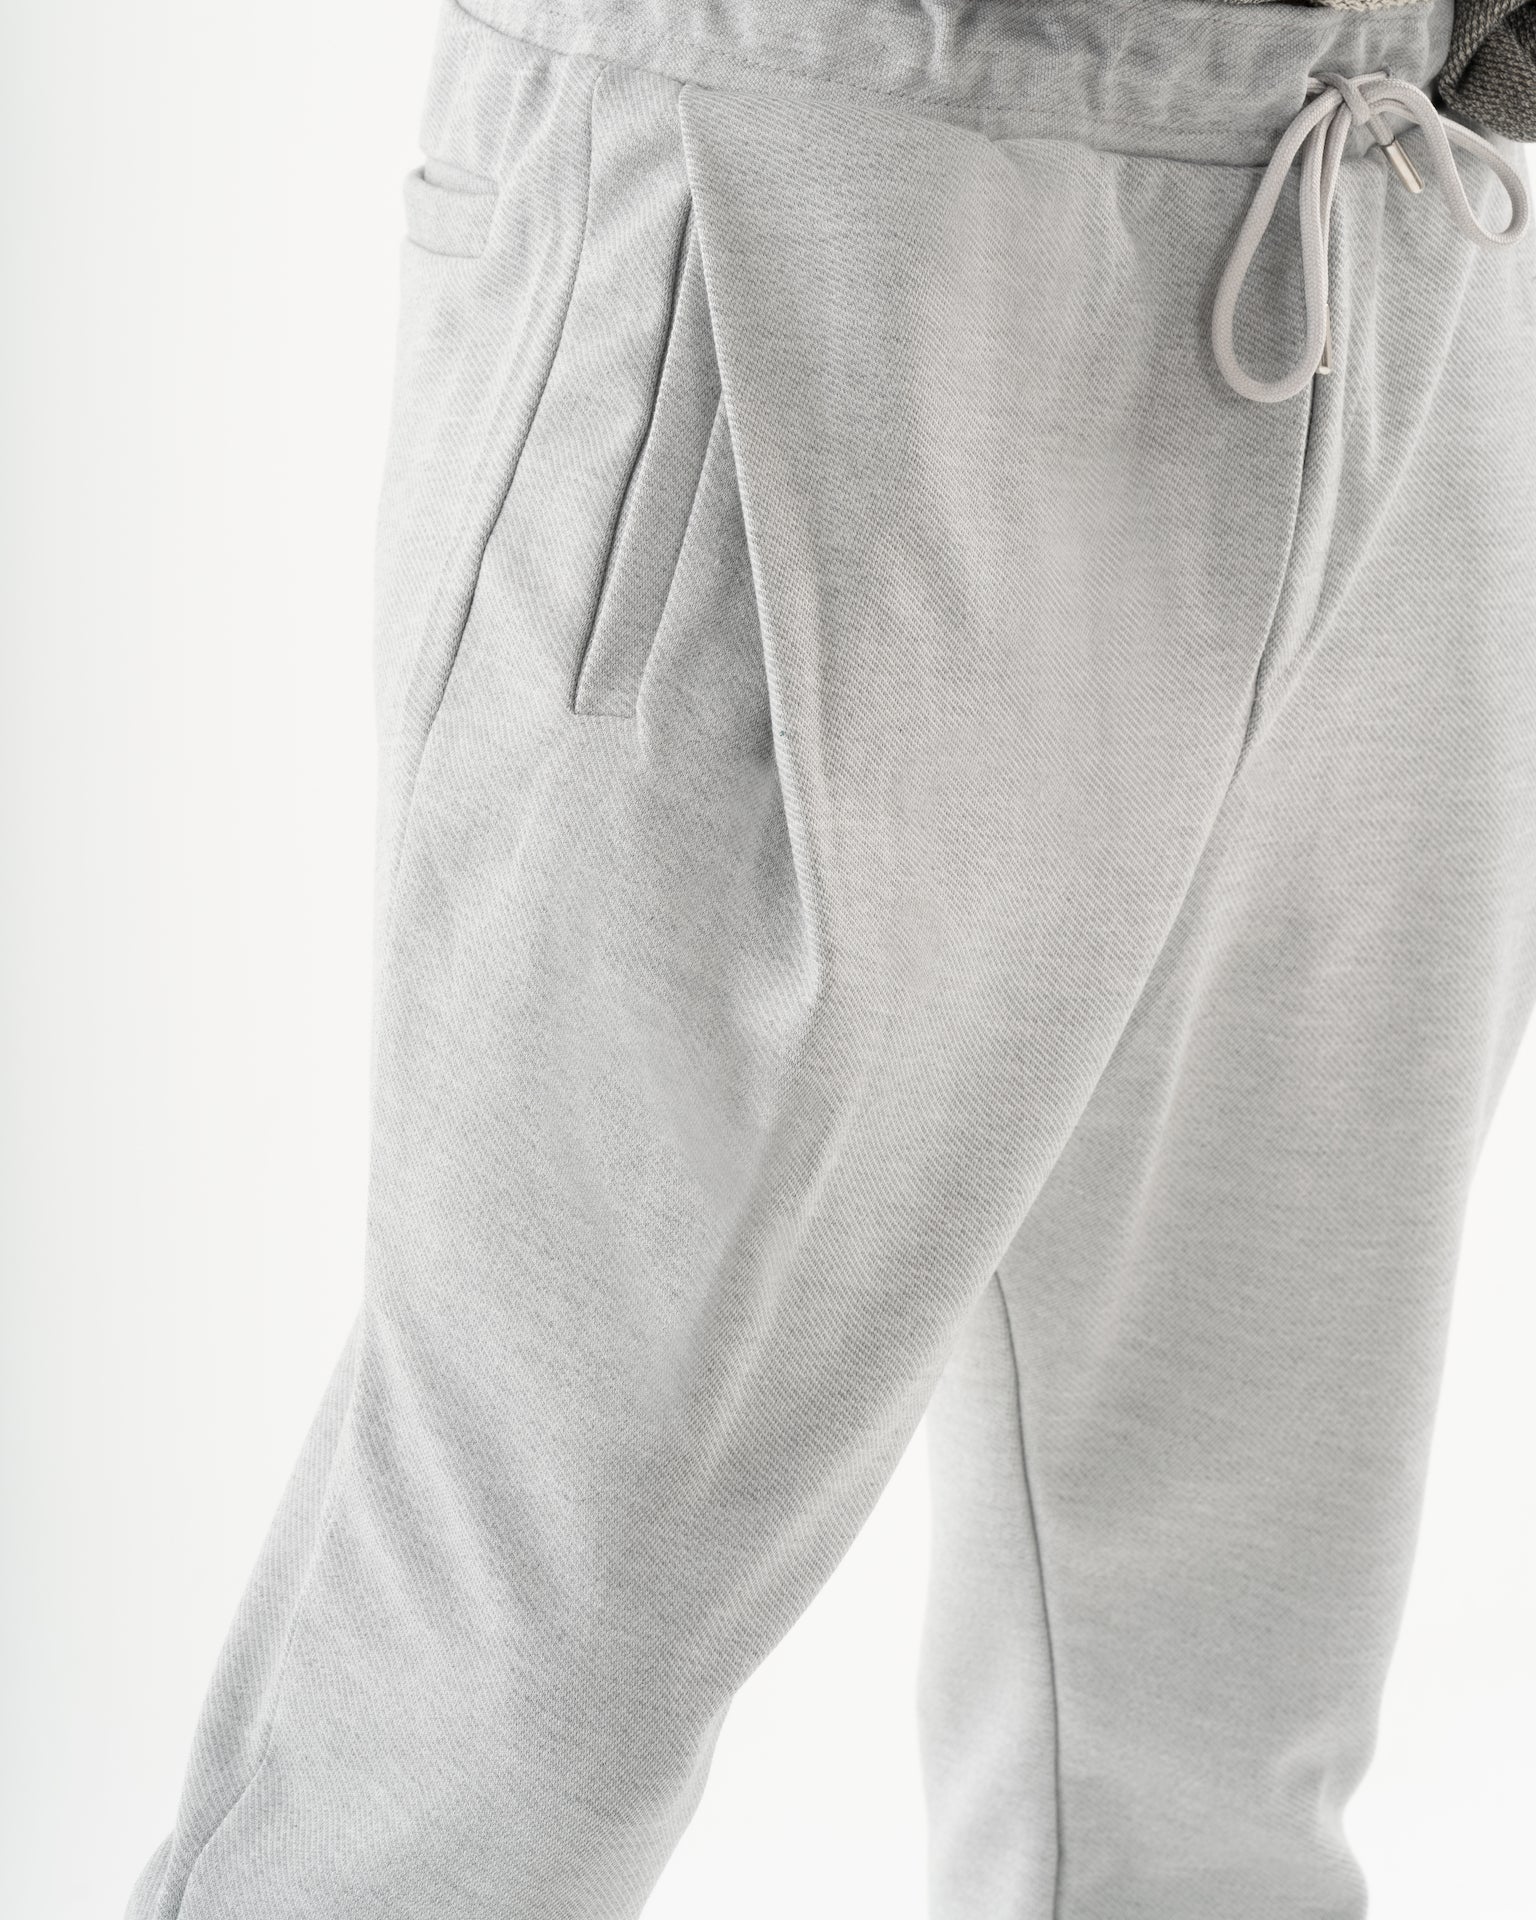 A man wearing SERENE JOGGERS for everyday wear.